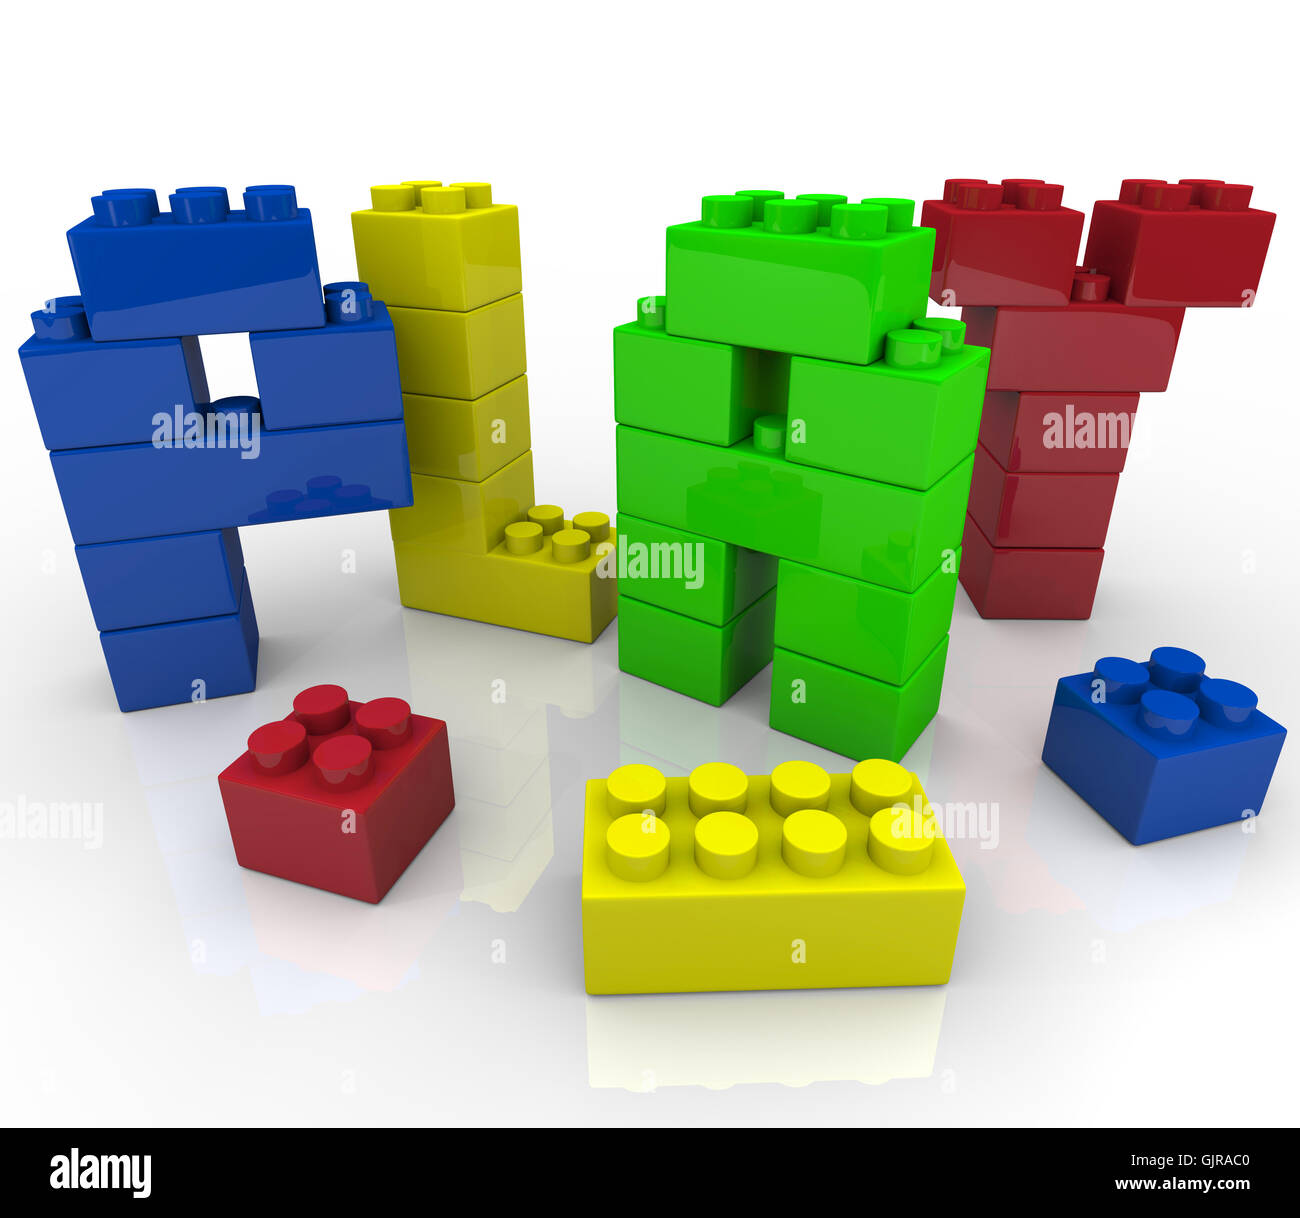 Play - Creative and Imaginative Learning with Building Blocks Stock Photo